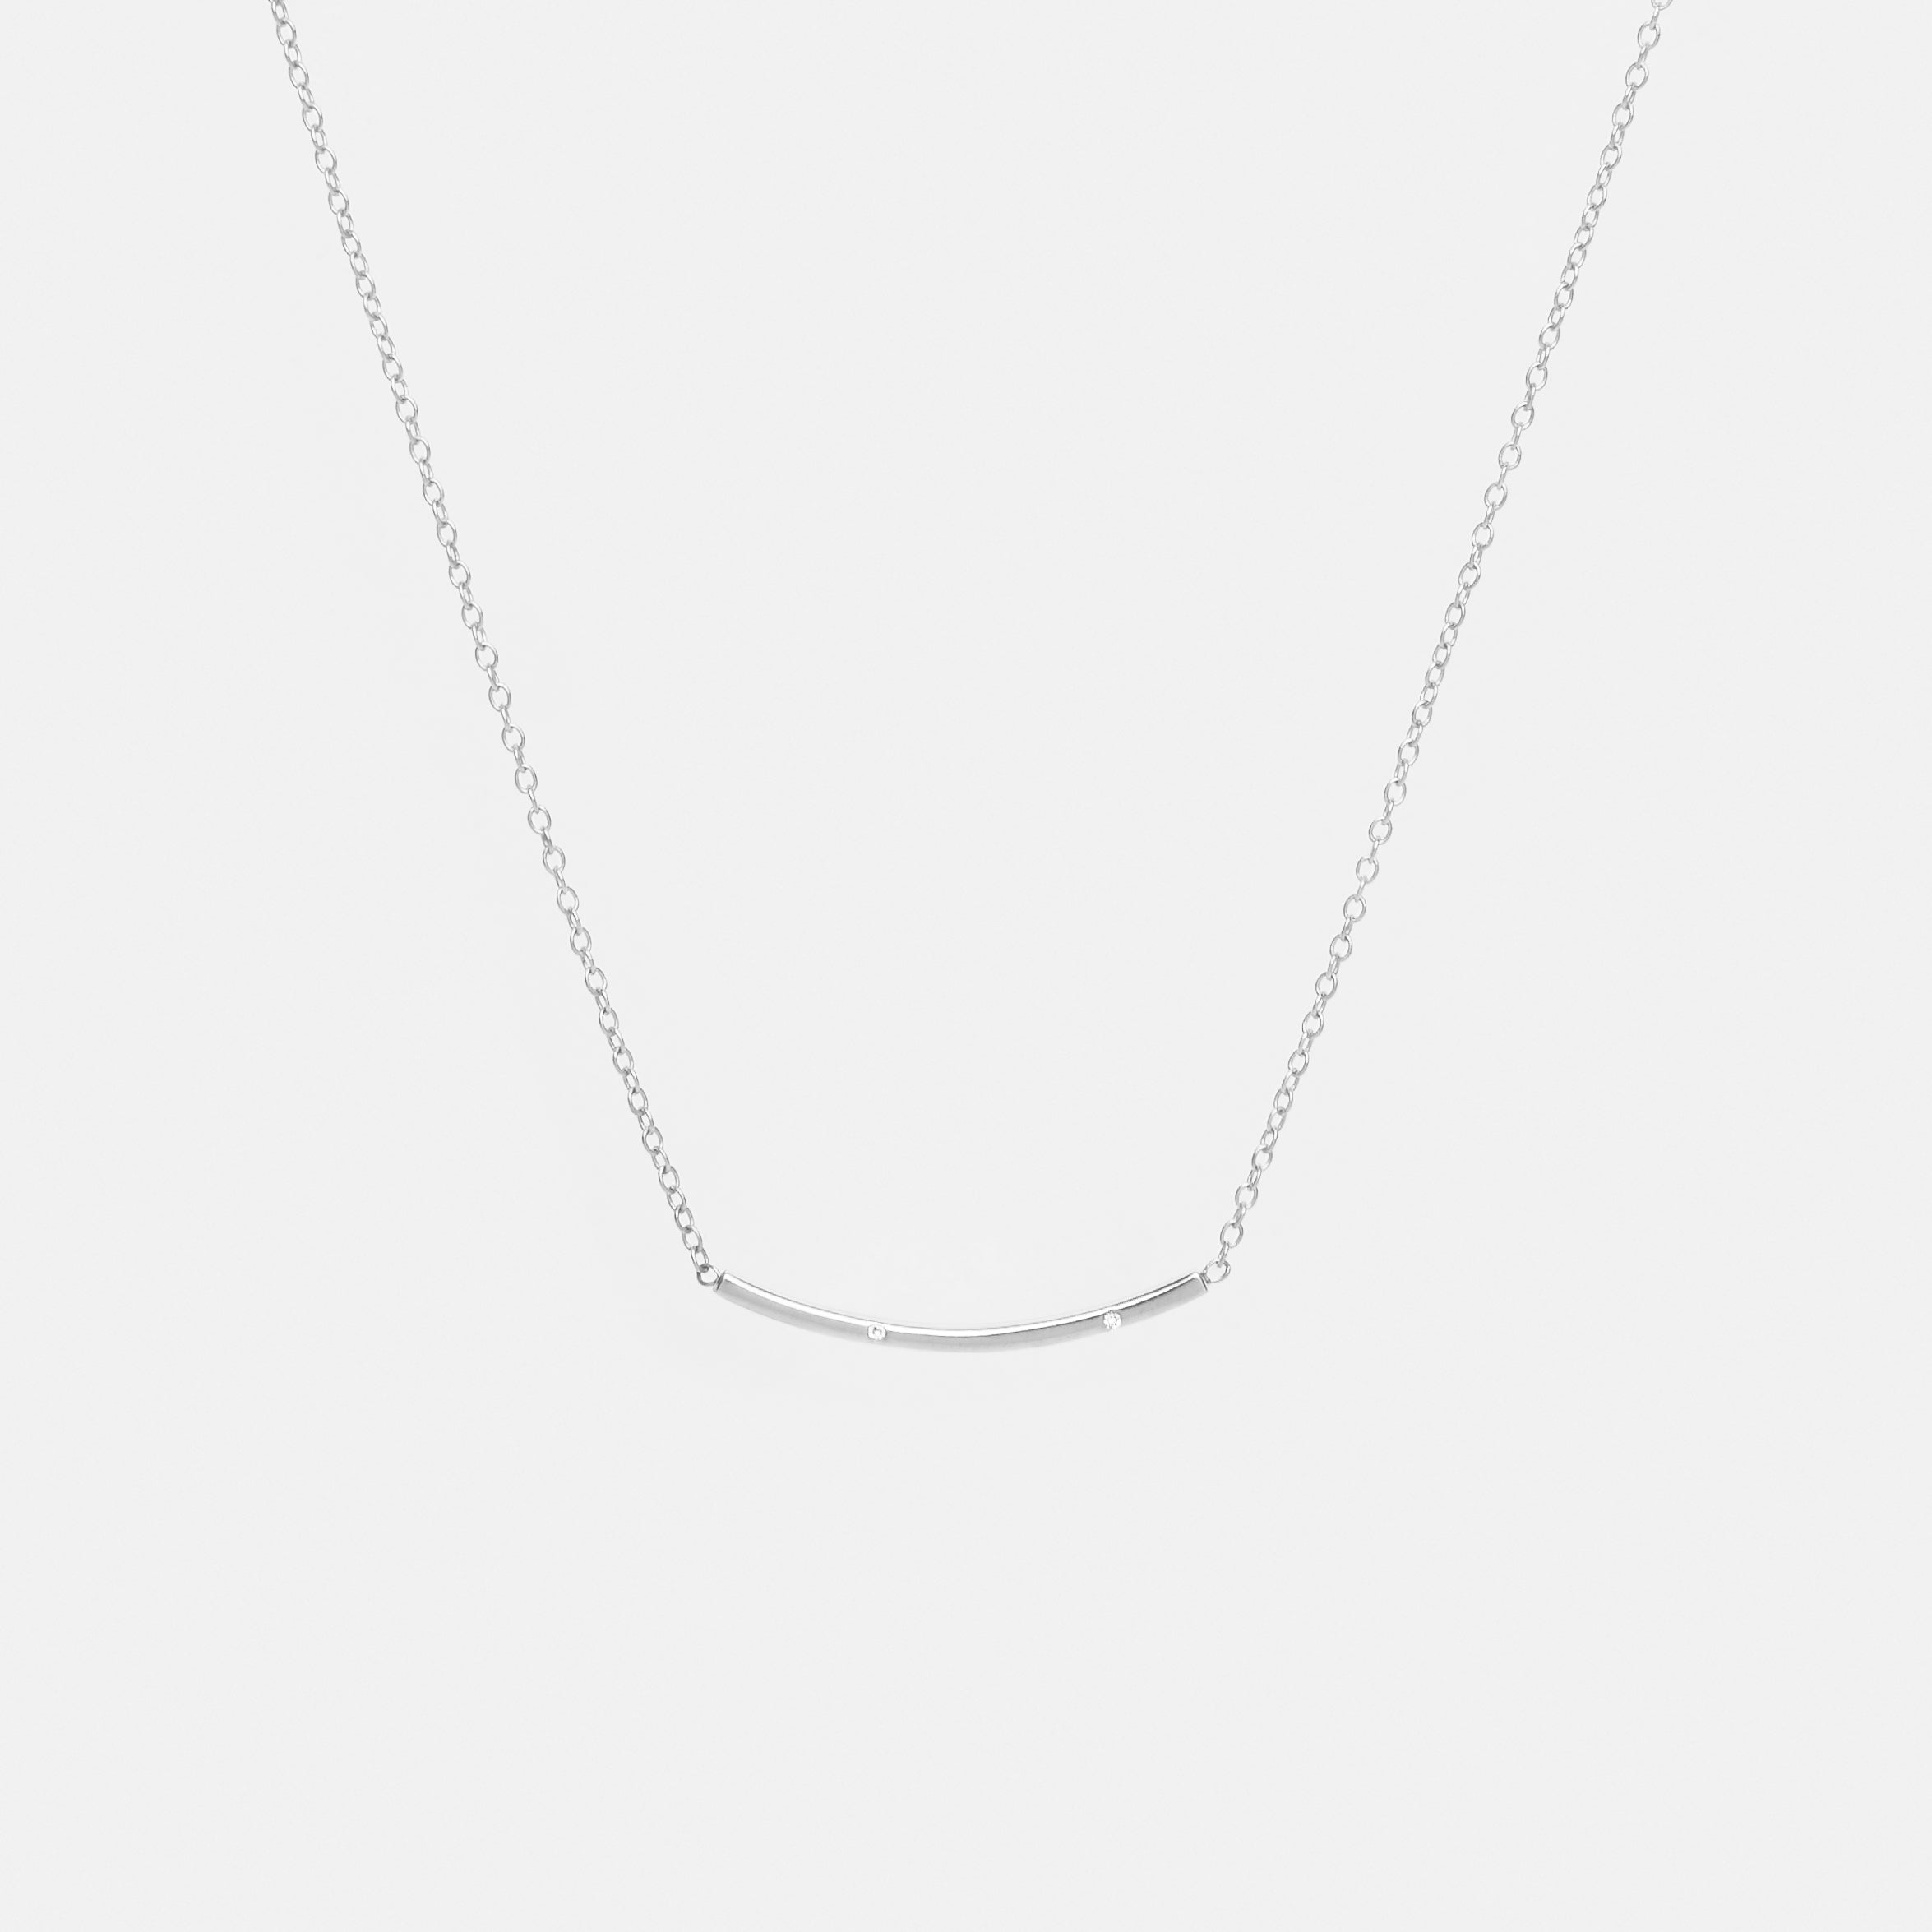 Sara Minimalist Necklace in Sterling Silver set with White Diamonds By SHW Fine Jewelry NYC